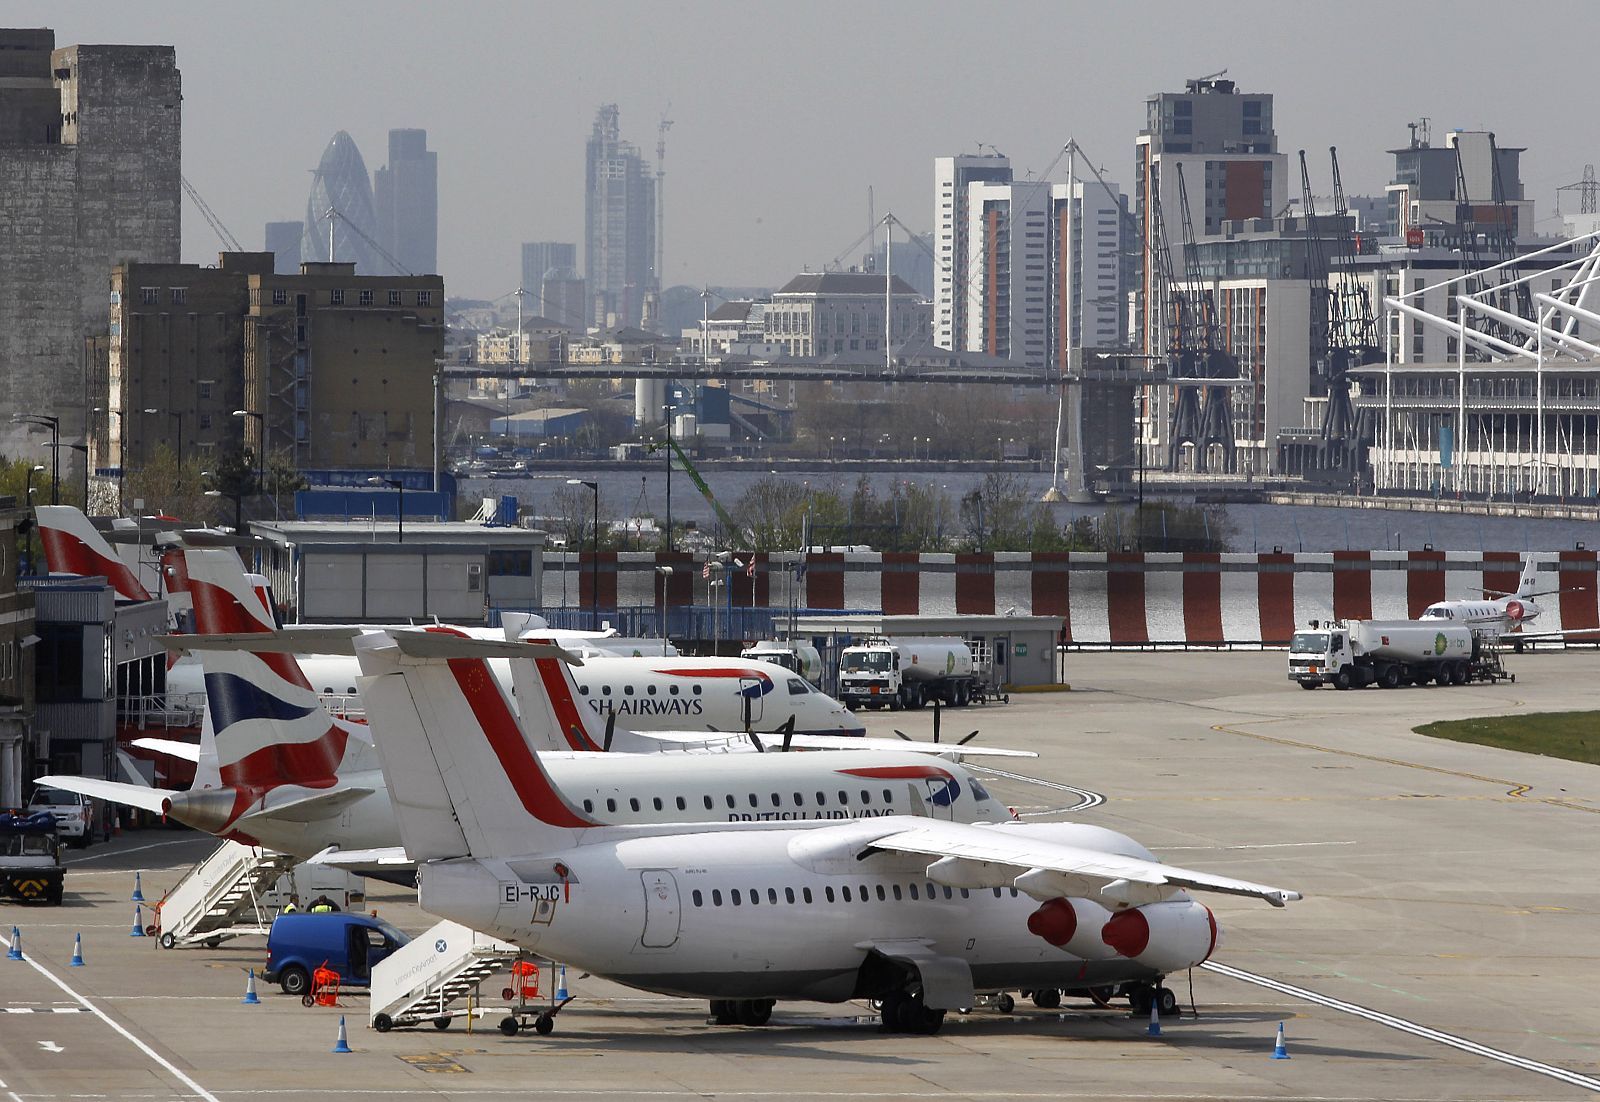 Grounded jets are seen parked at City Airport in London